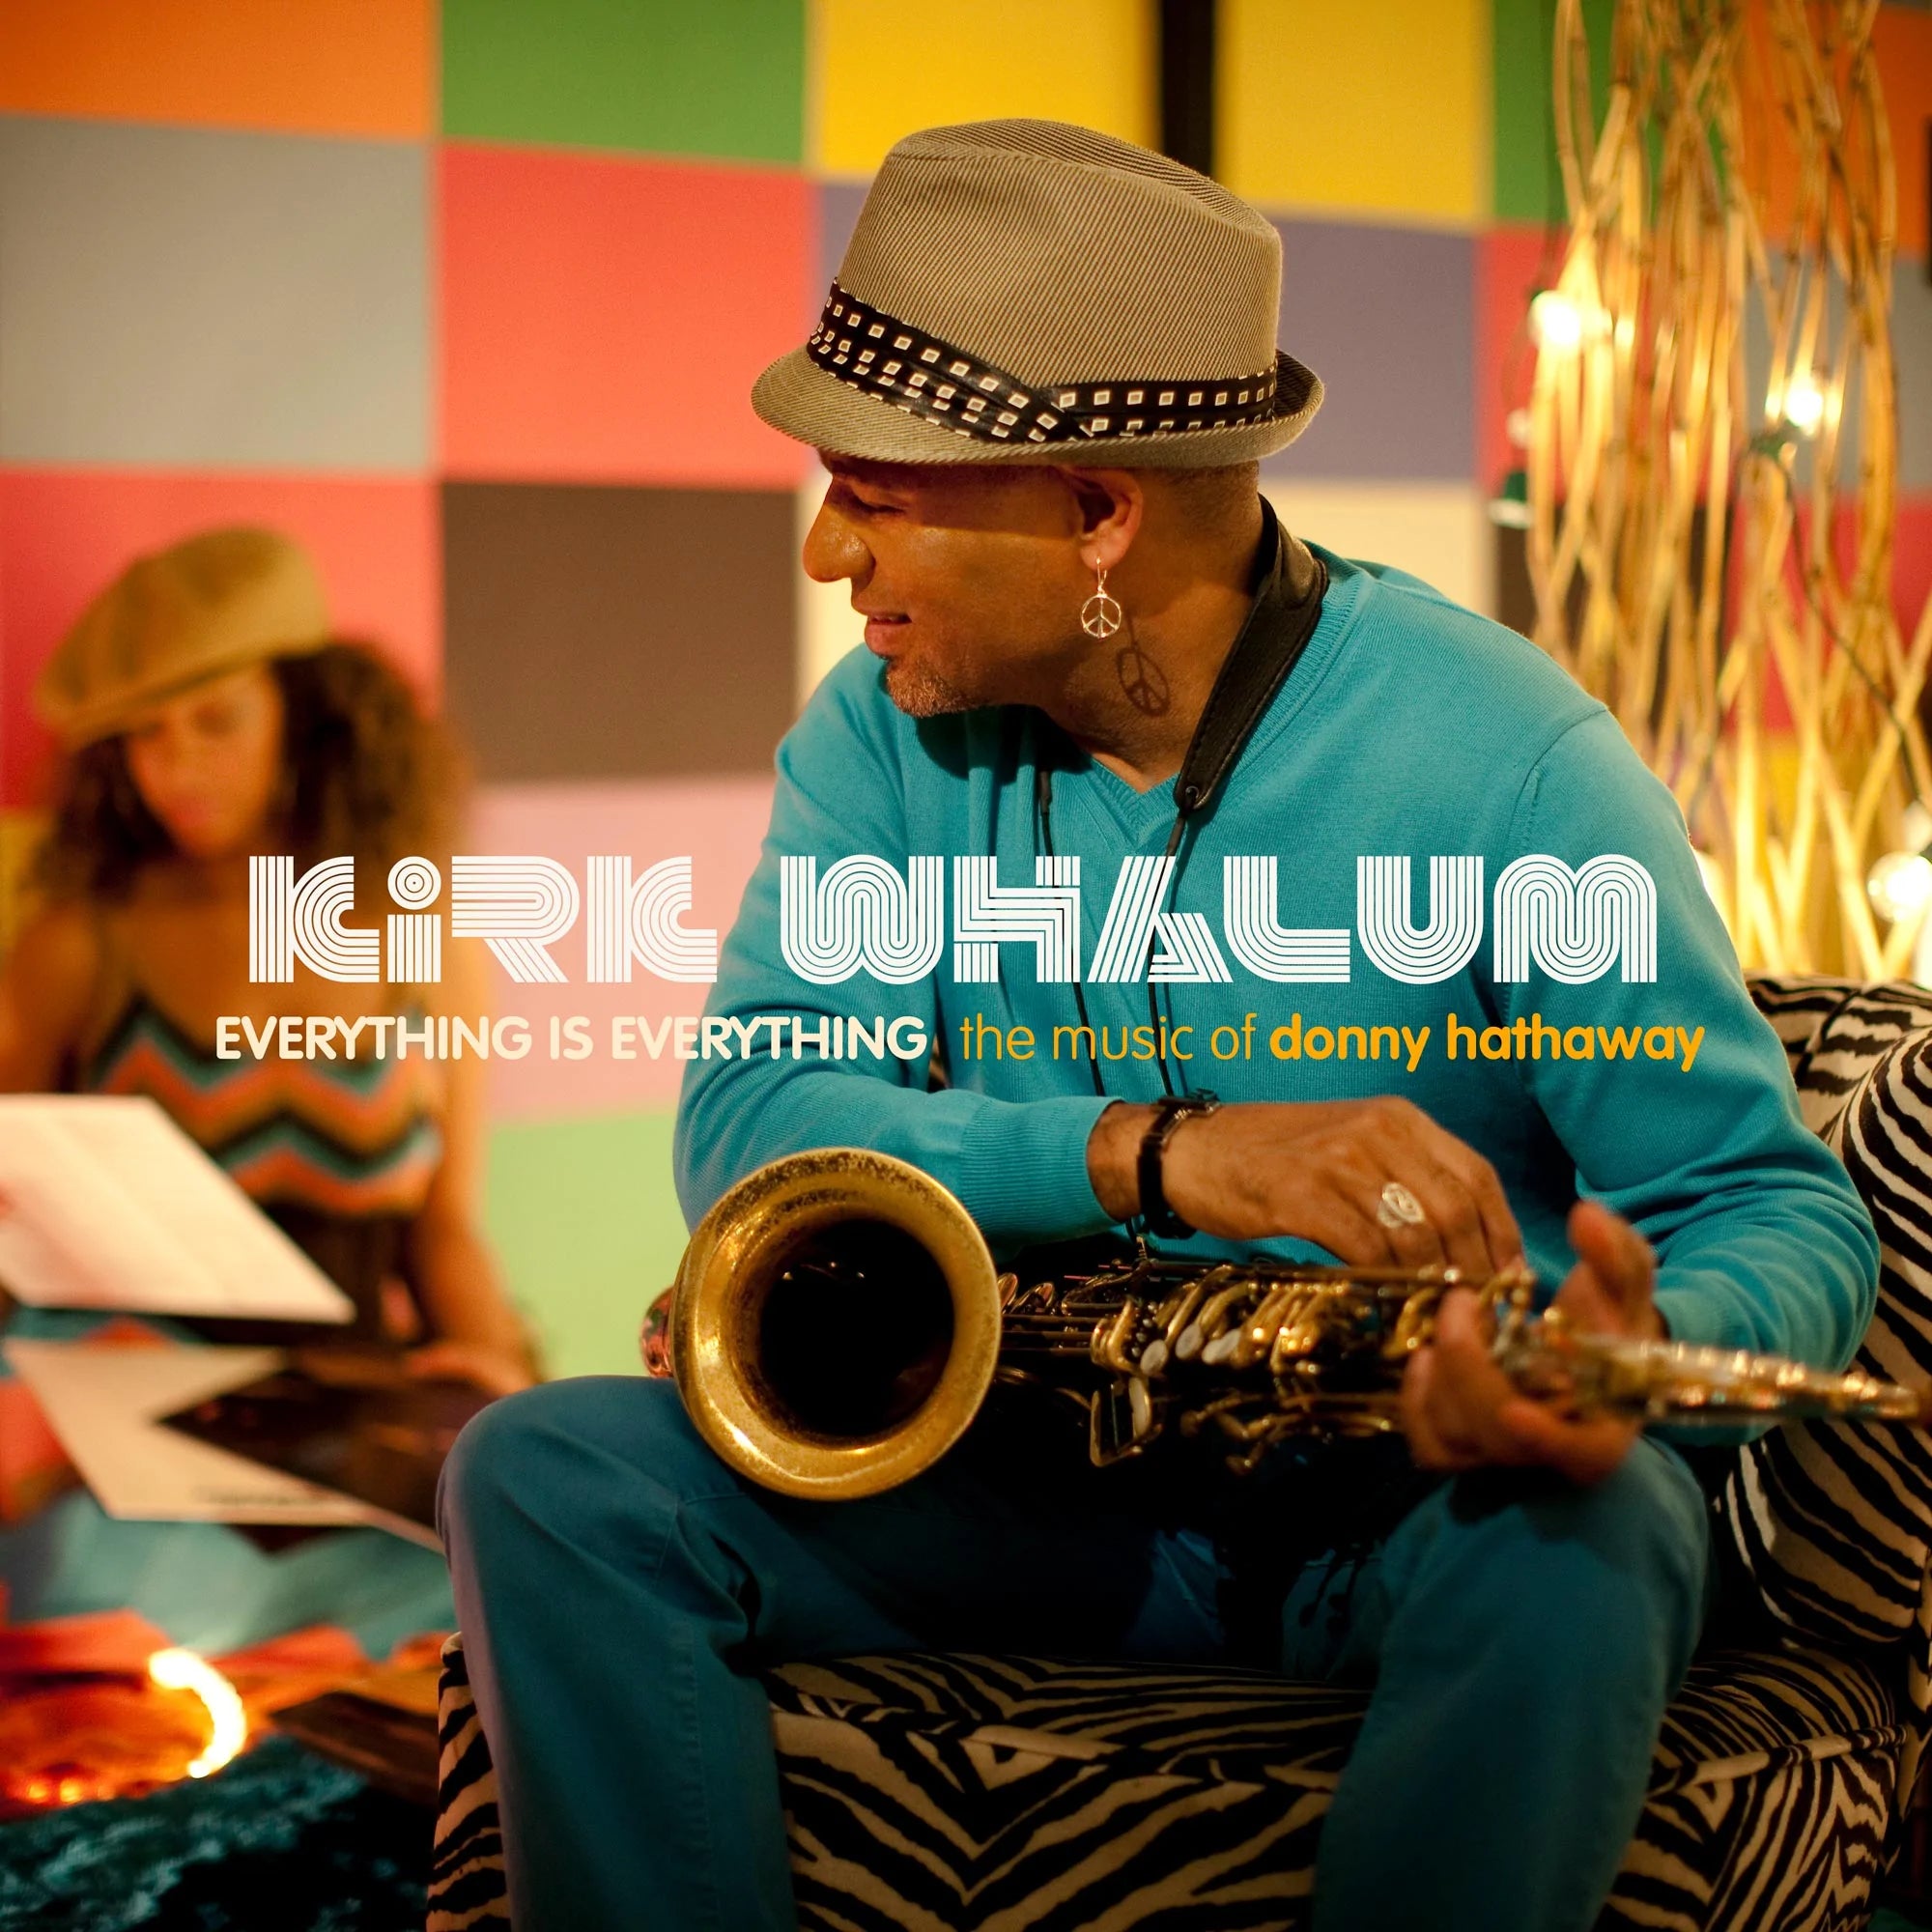 Kirk Whalum - Everything Is Everything: The Music of Donny Hathaway